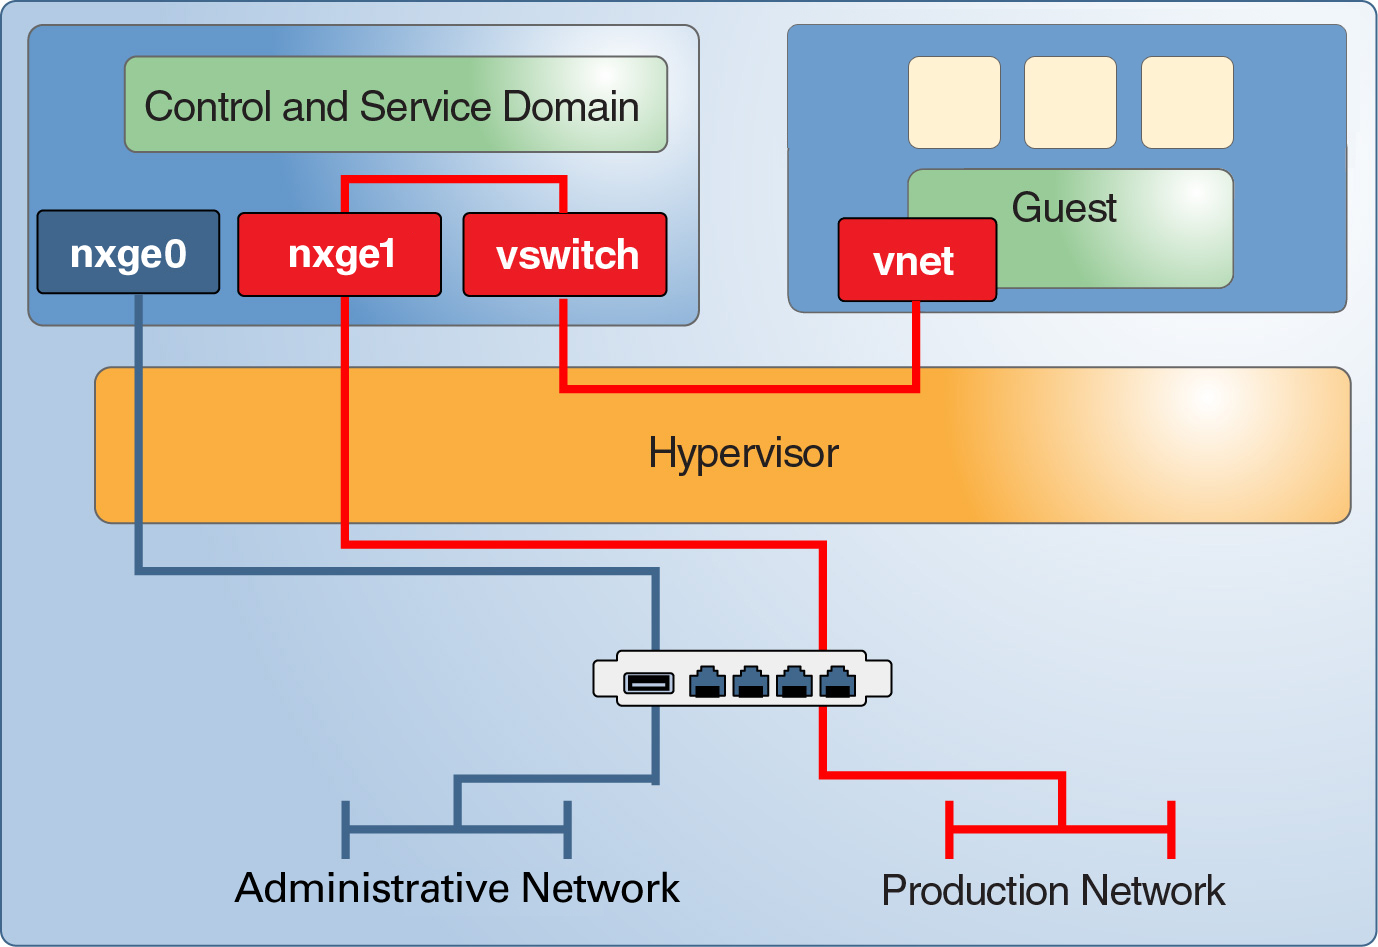 image:Graphic shows how discrete network interfaces support a dedicated management network for the control domain and a production network for the guests.